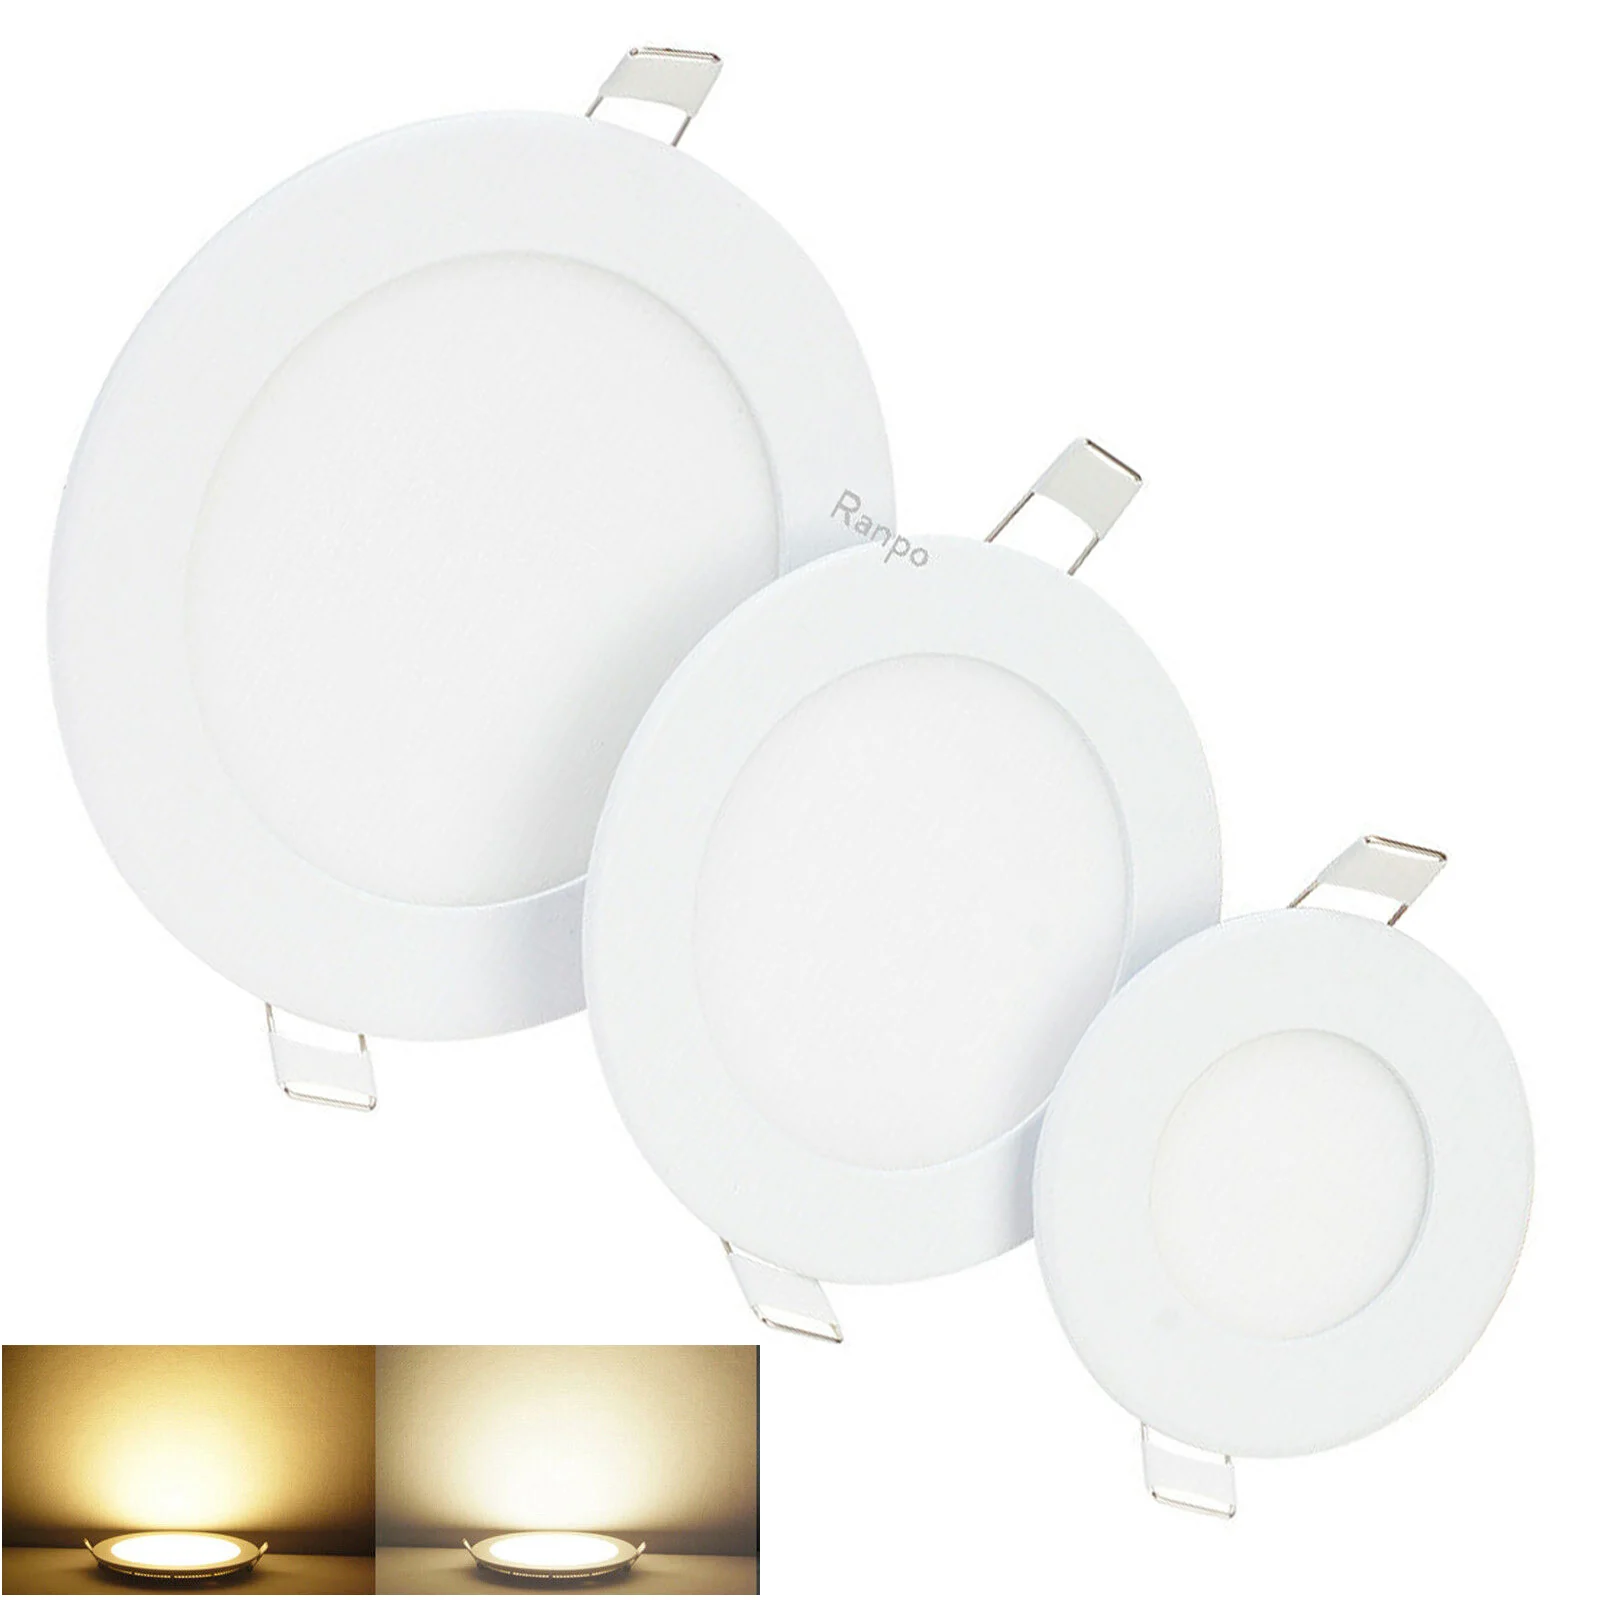 4 X Cold Whit 6,9,12,15W LED Panel Light Recessed Ceiling Downlight Ceiling Fans 